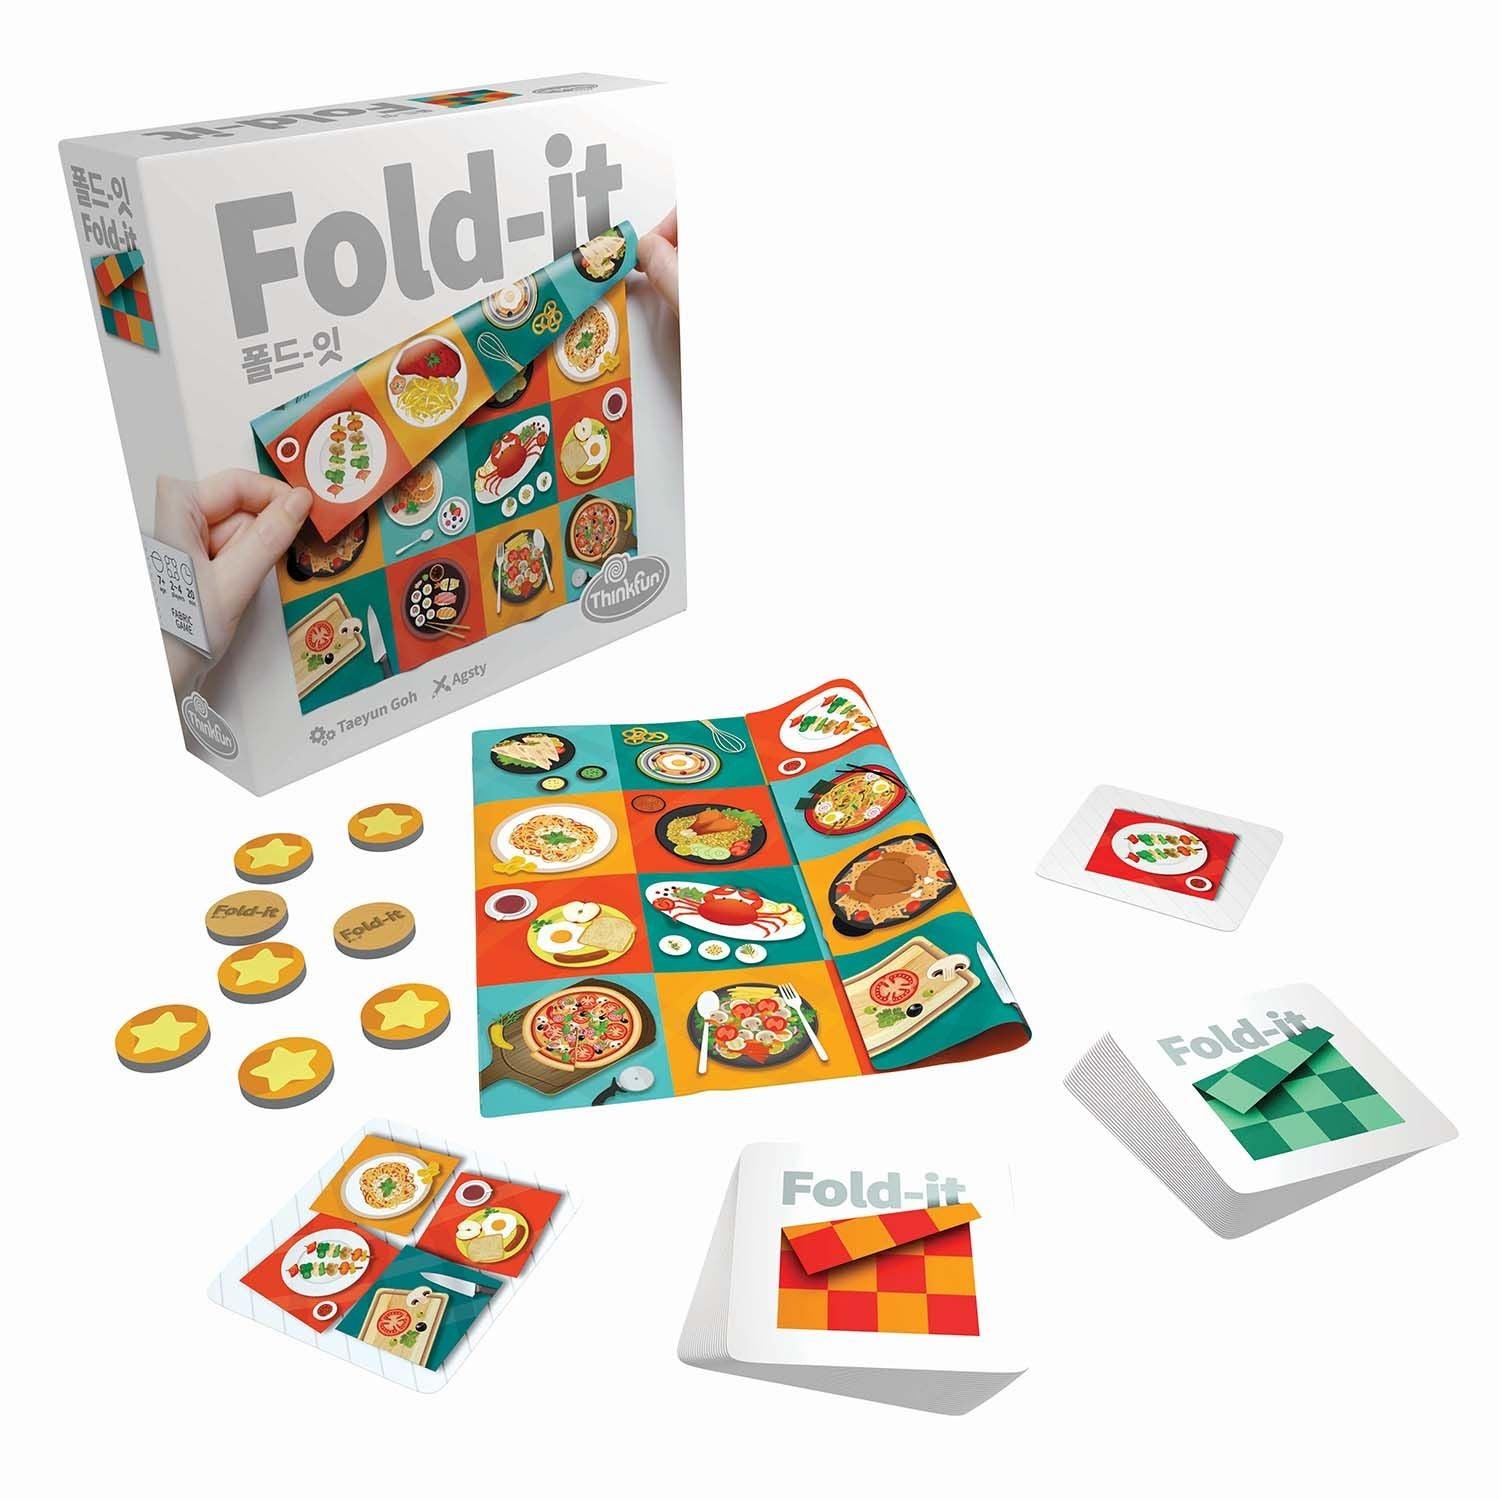 Fold-it - Gaming Library